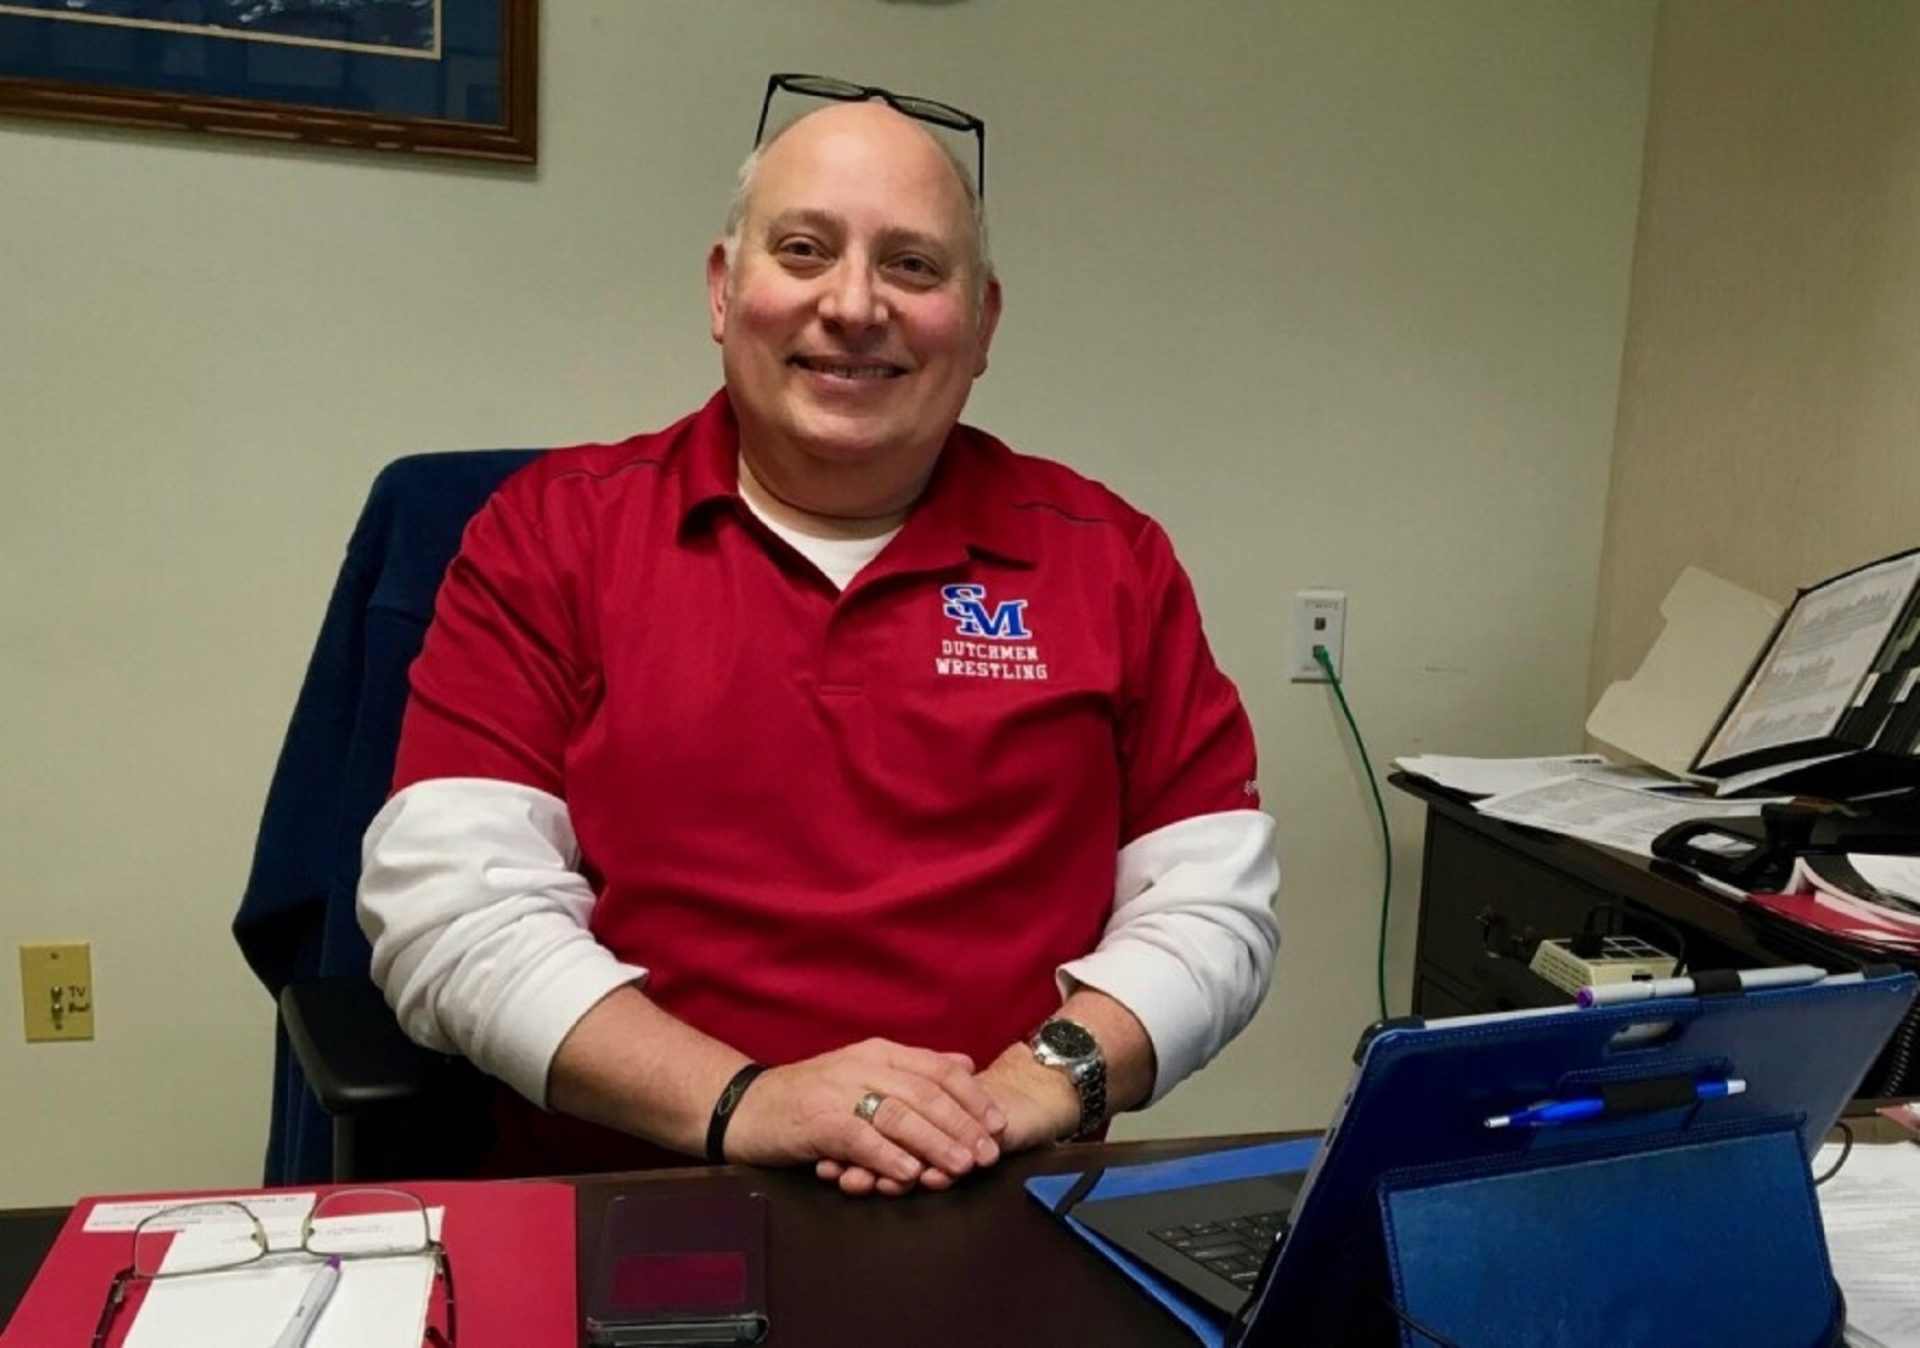 Brian Toth, who retired as superintendent of the Saint Marys Area School District, is now acting superintendent of the Millersburg Area School District in Dauphin County.